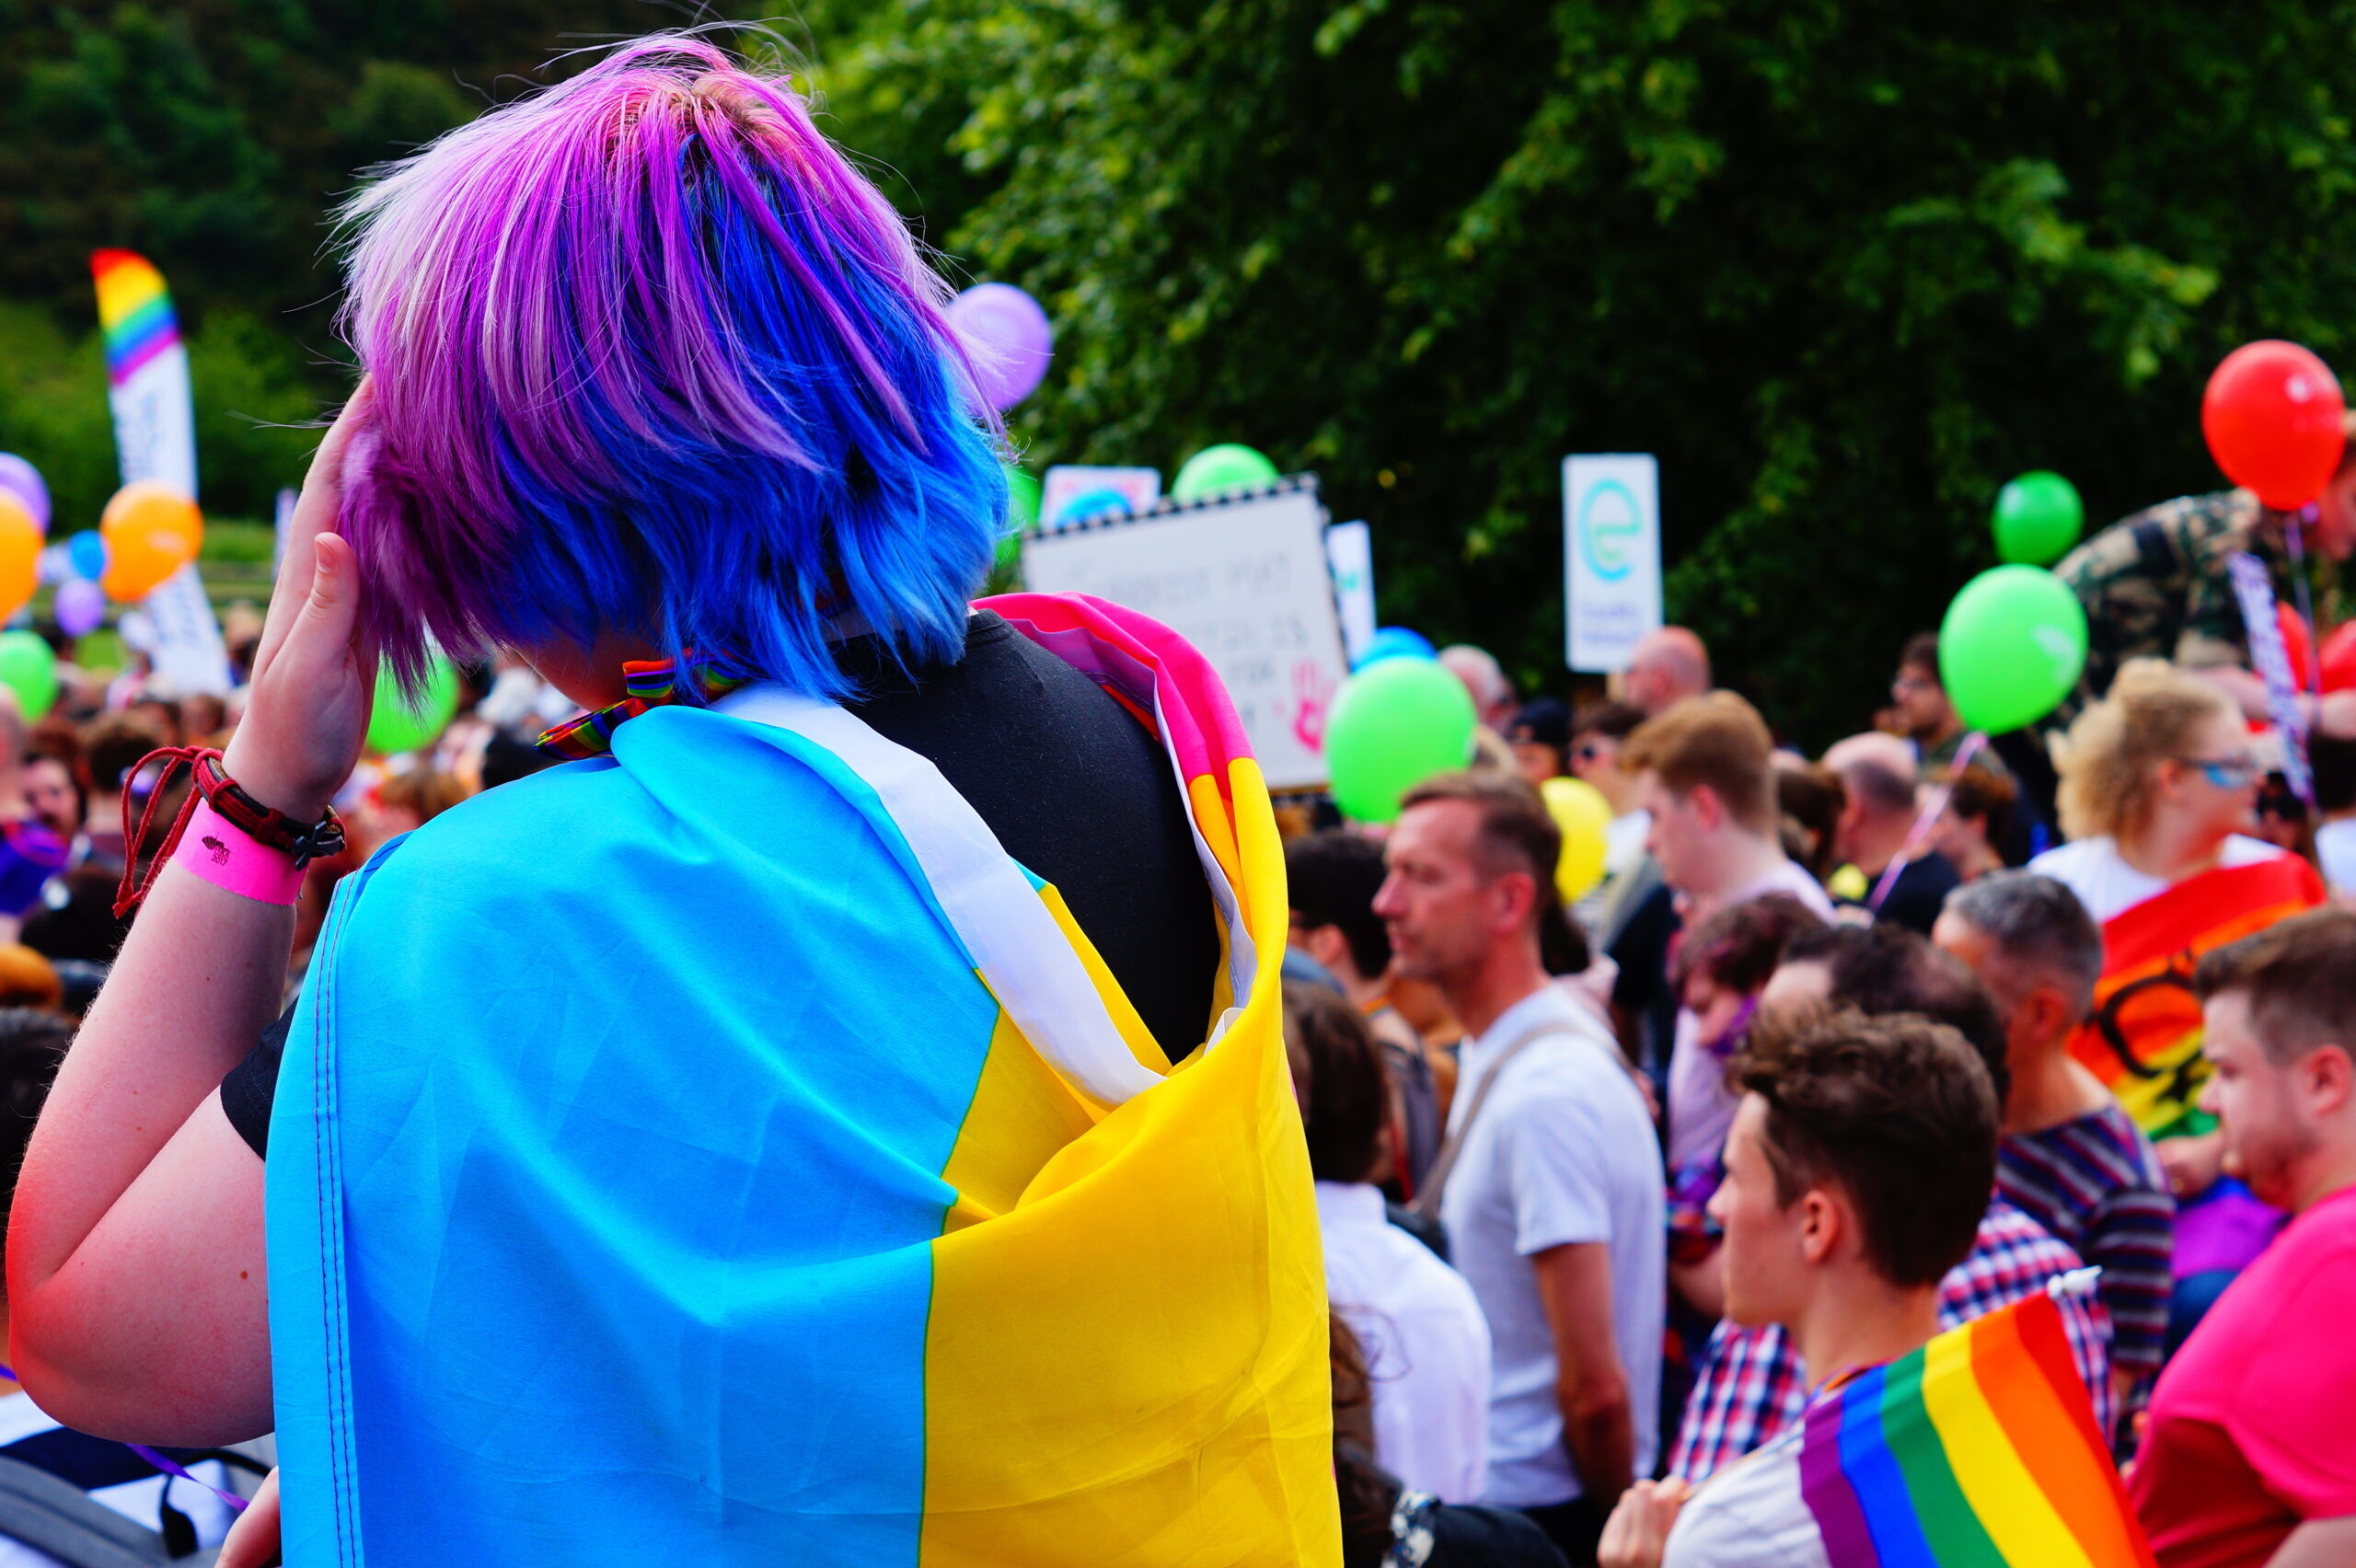 Edinburgh, Scotland - June 17 2017: Young person with coloured hair and pansexual pride flag around shoulders at Edinburgh Pride March